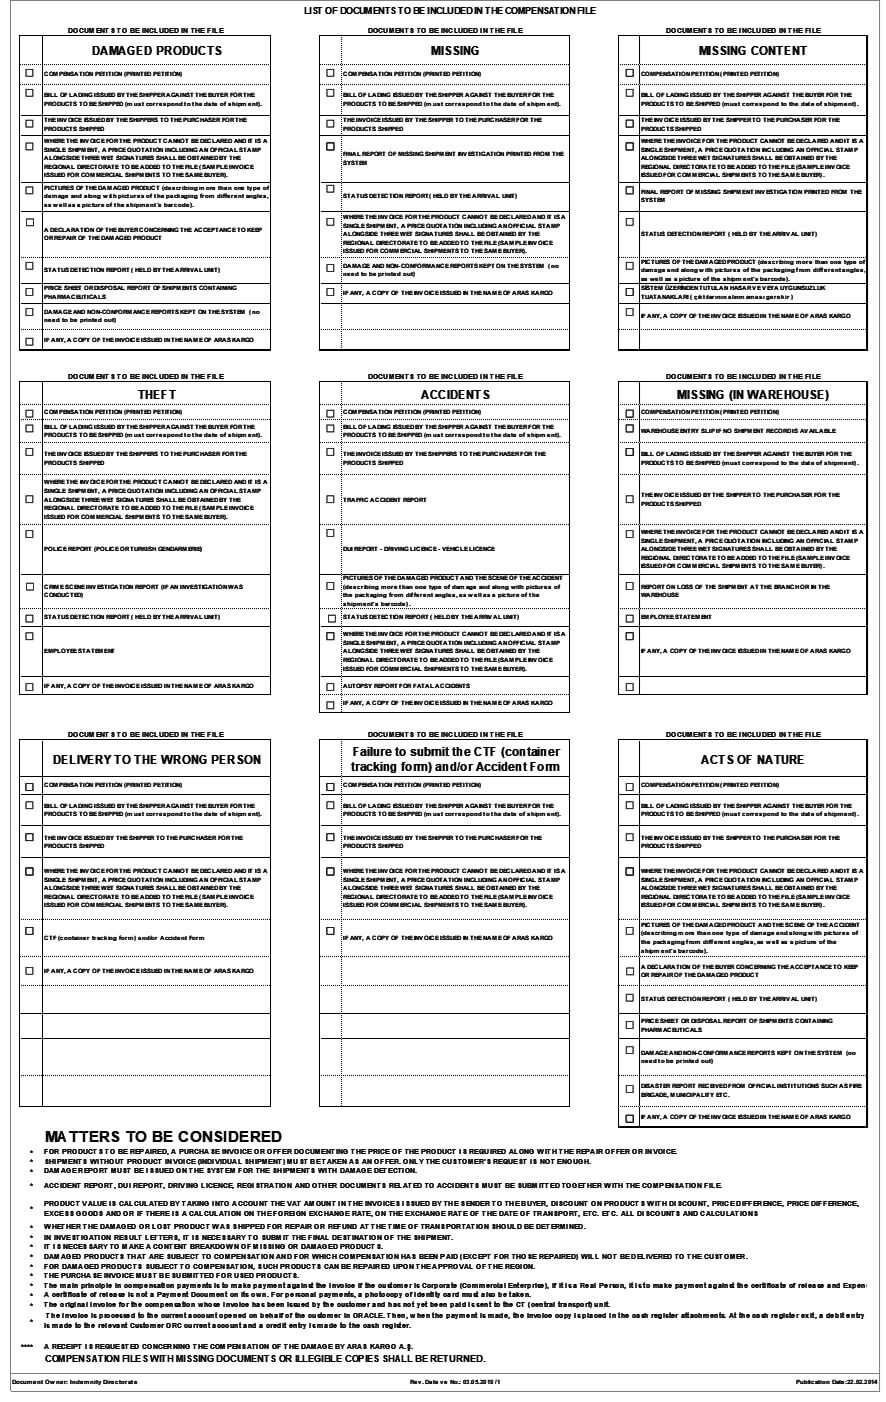 List of Documents Required in the Compensation File